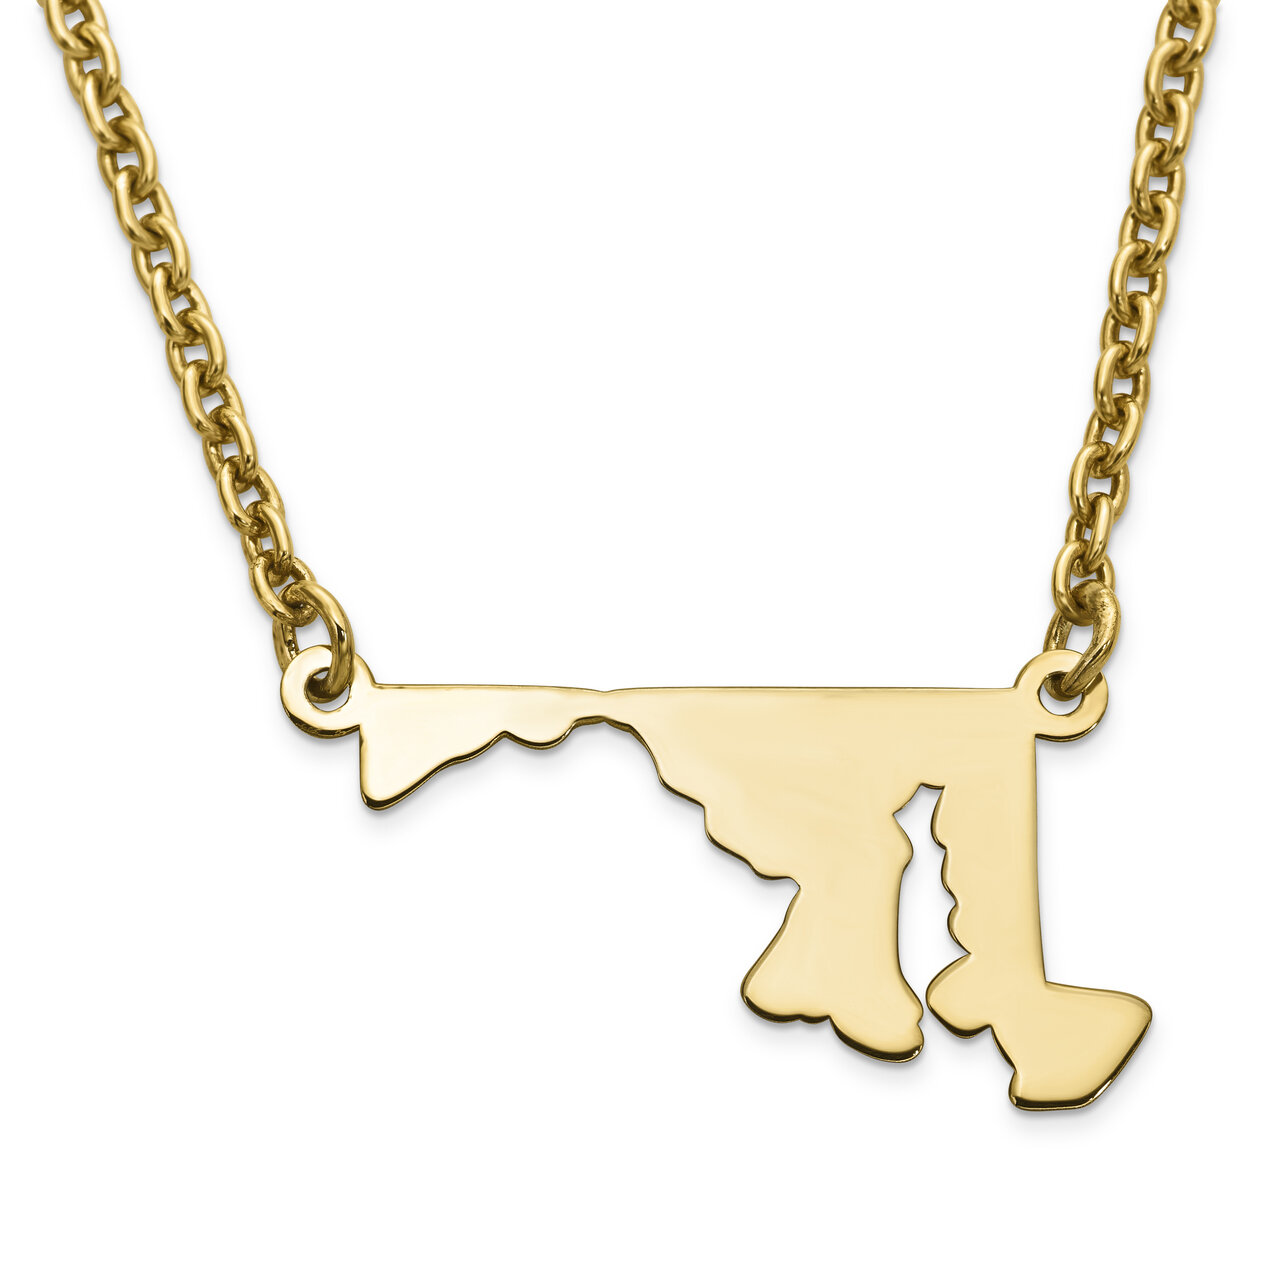 Maryland State Pendant Necklace with Chain 14k Yellow Gold Engravable XNA706Y-MD